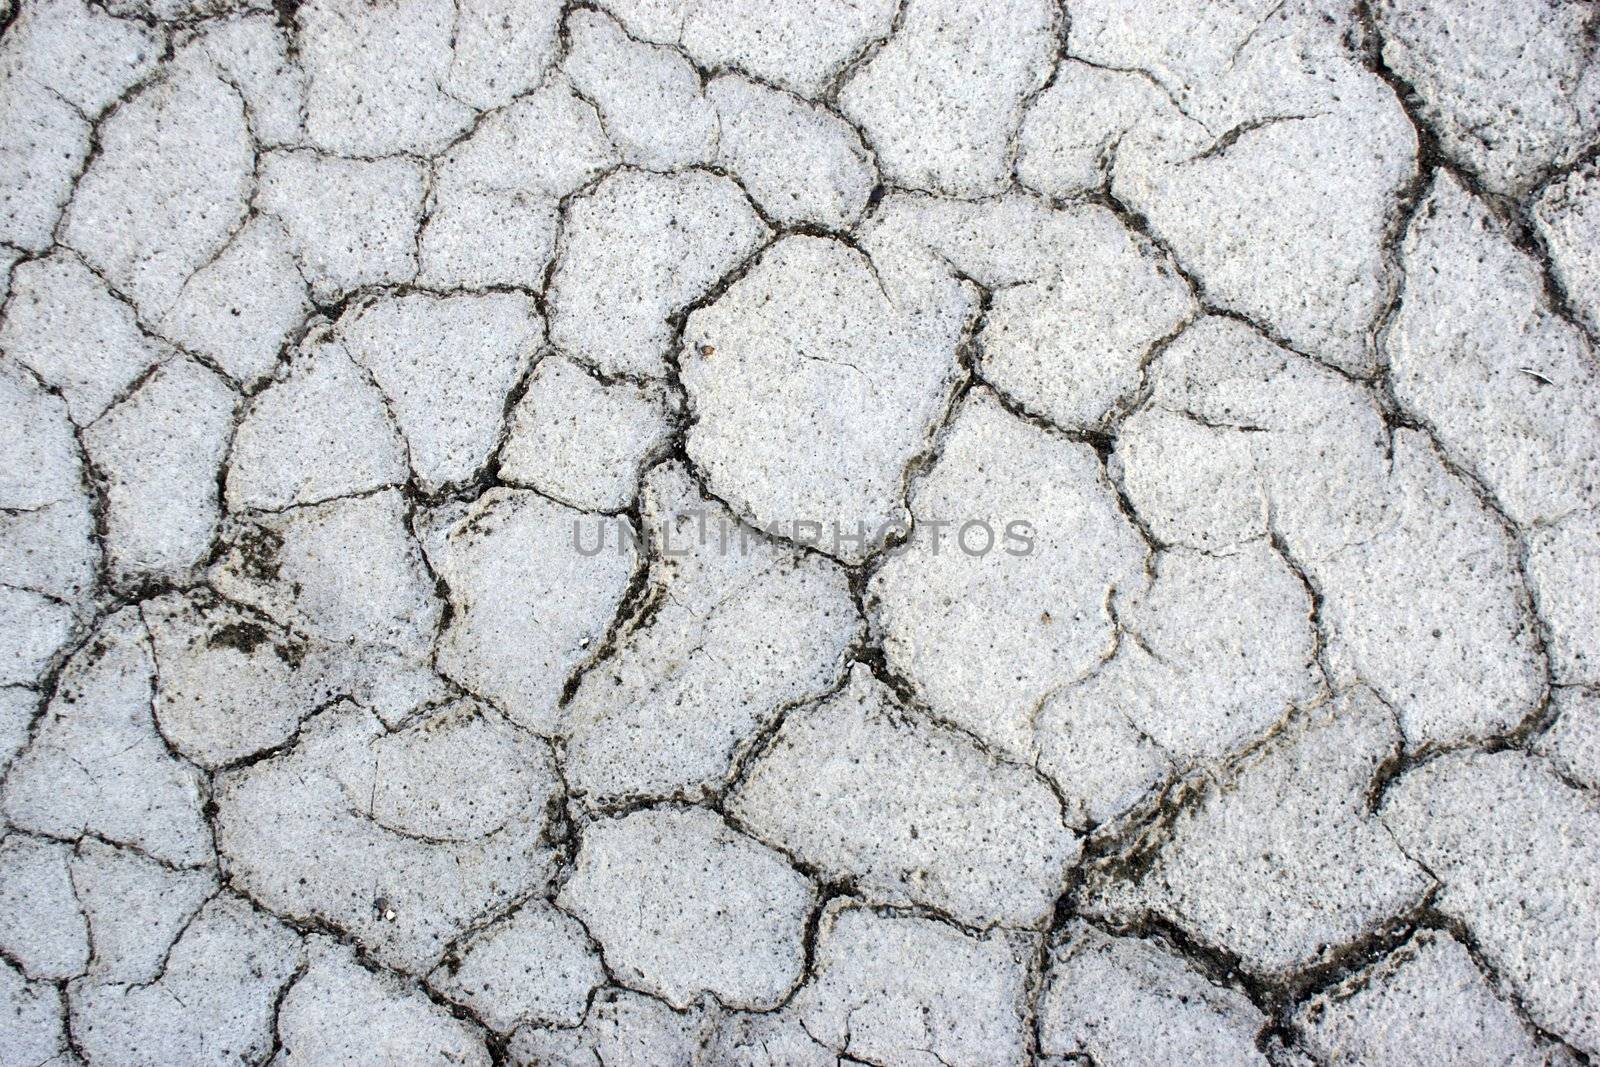 The cracked surface of ground